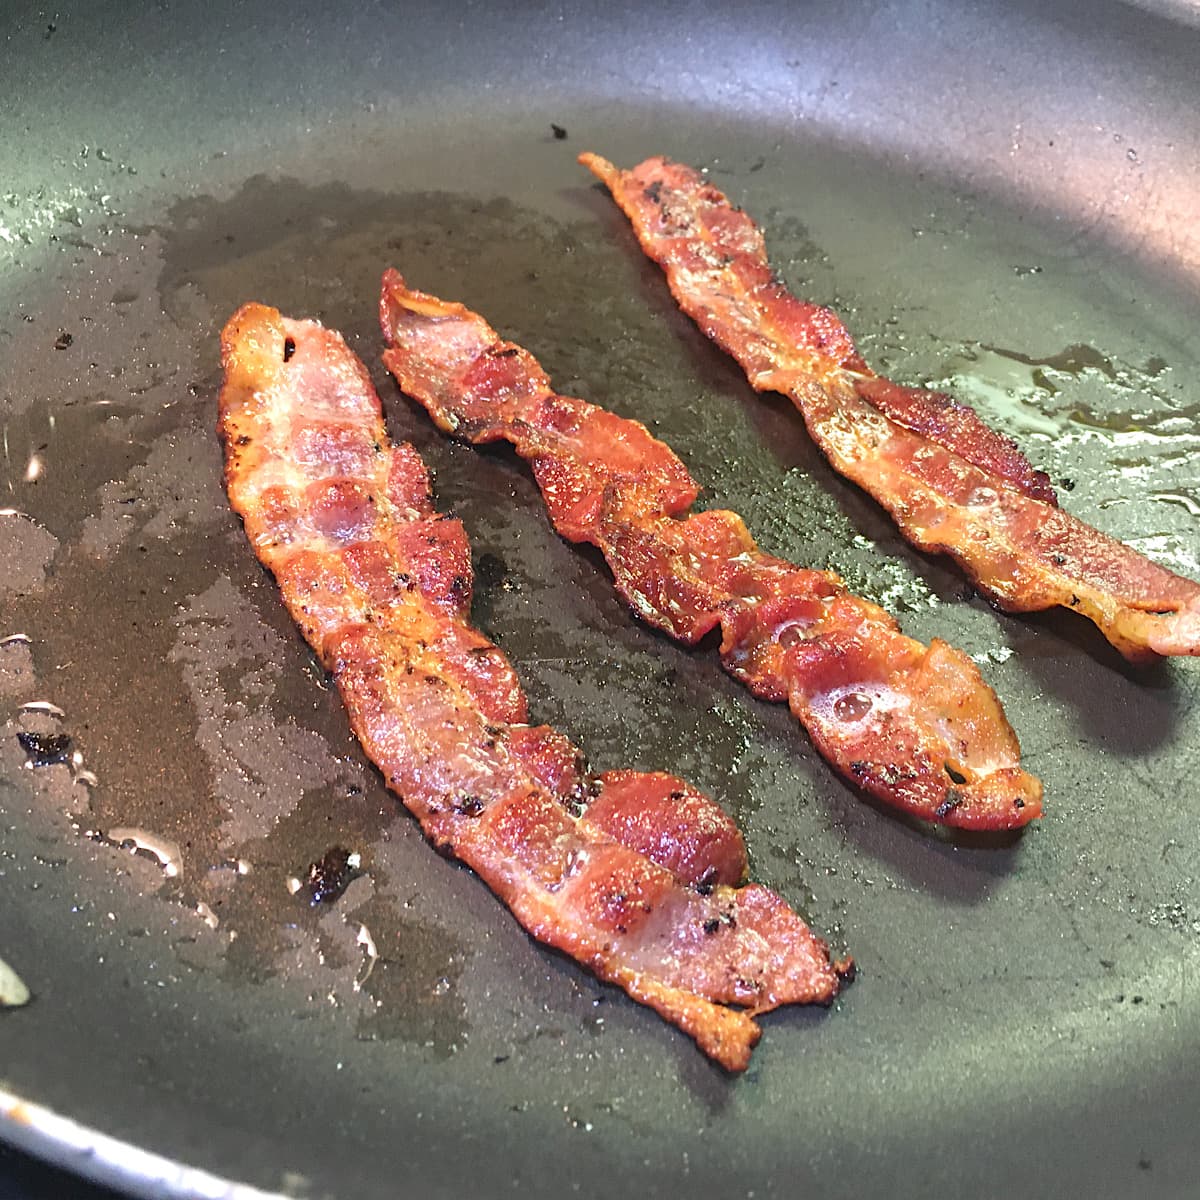 3 strips of fried bacon.